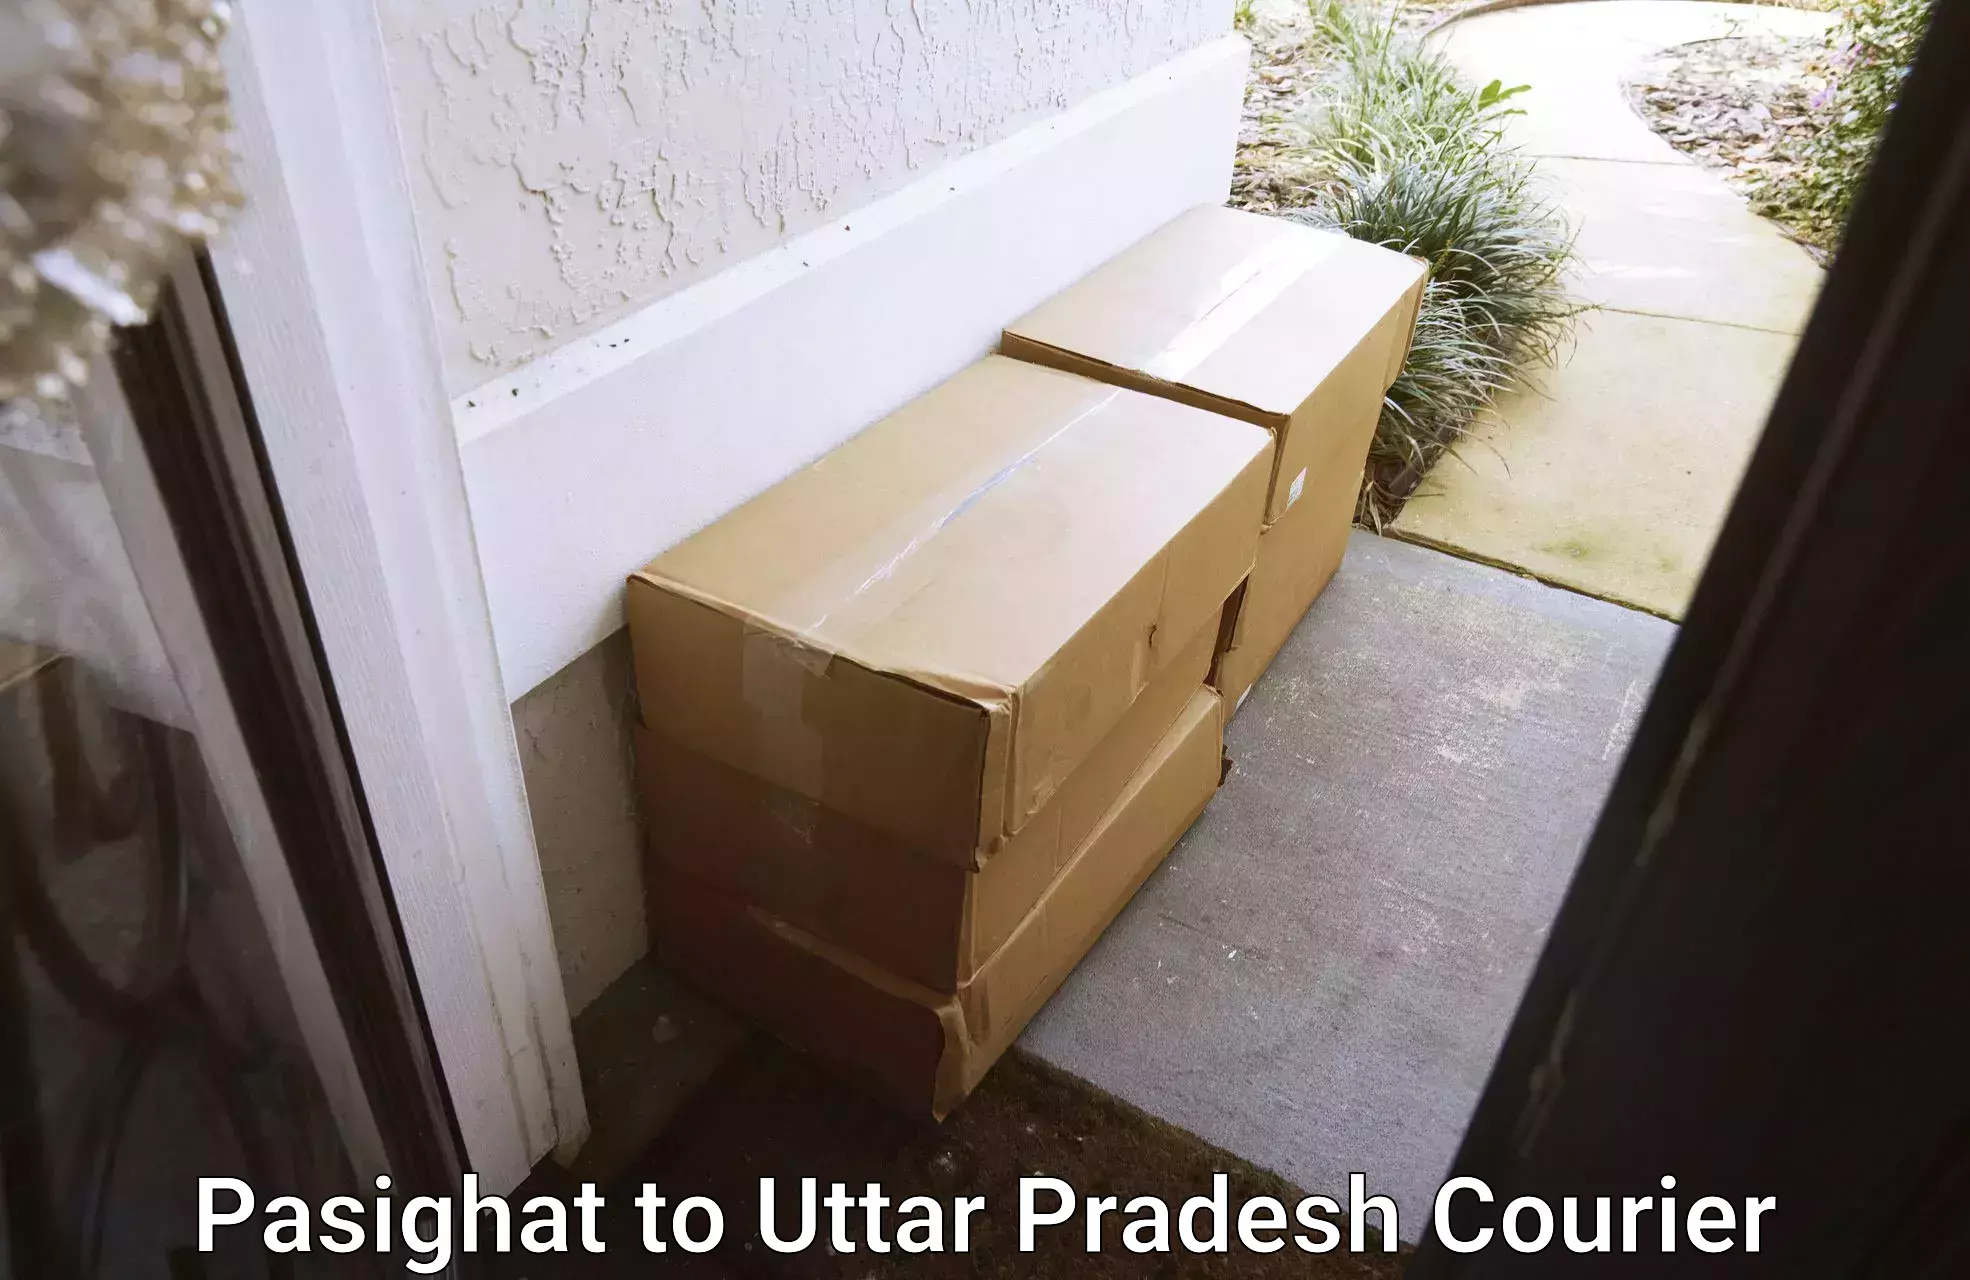 Bulk courier orders Pasighat to Unnao